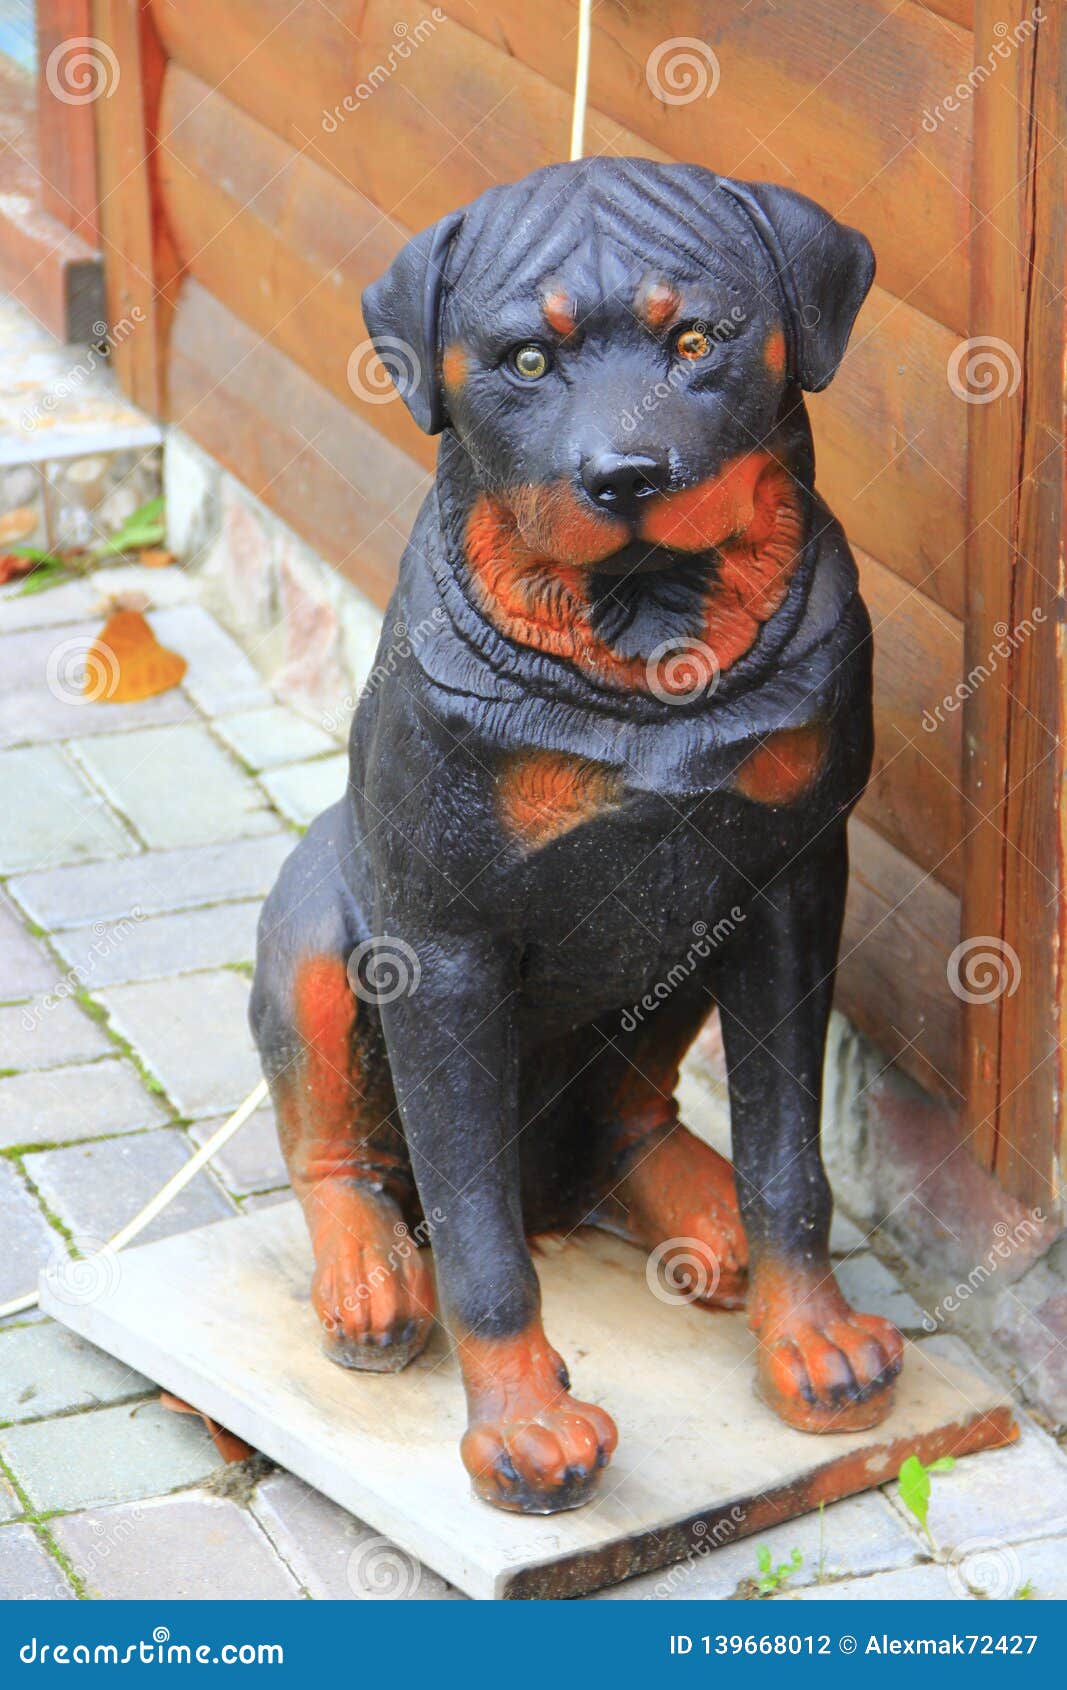 Beautiful Sculpture Of Black-and-red Rottweiler. Statue Of ...